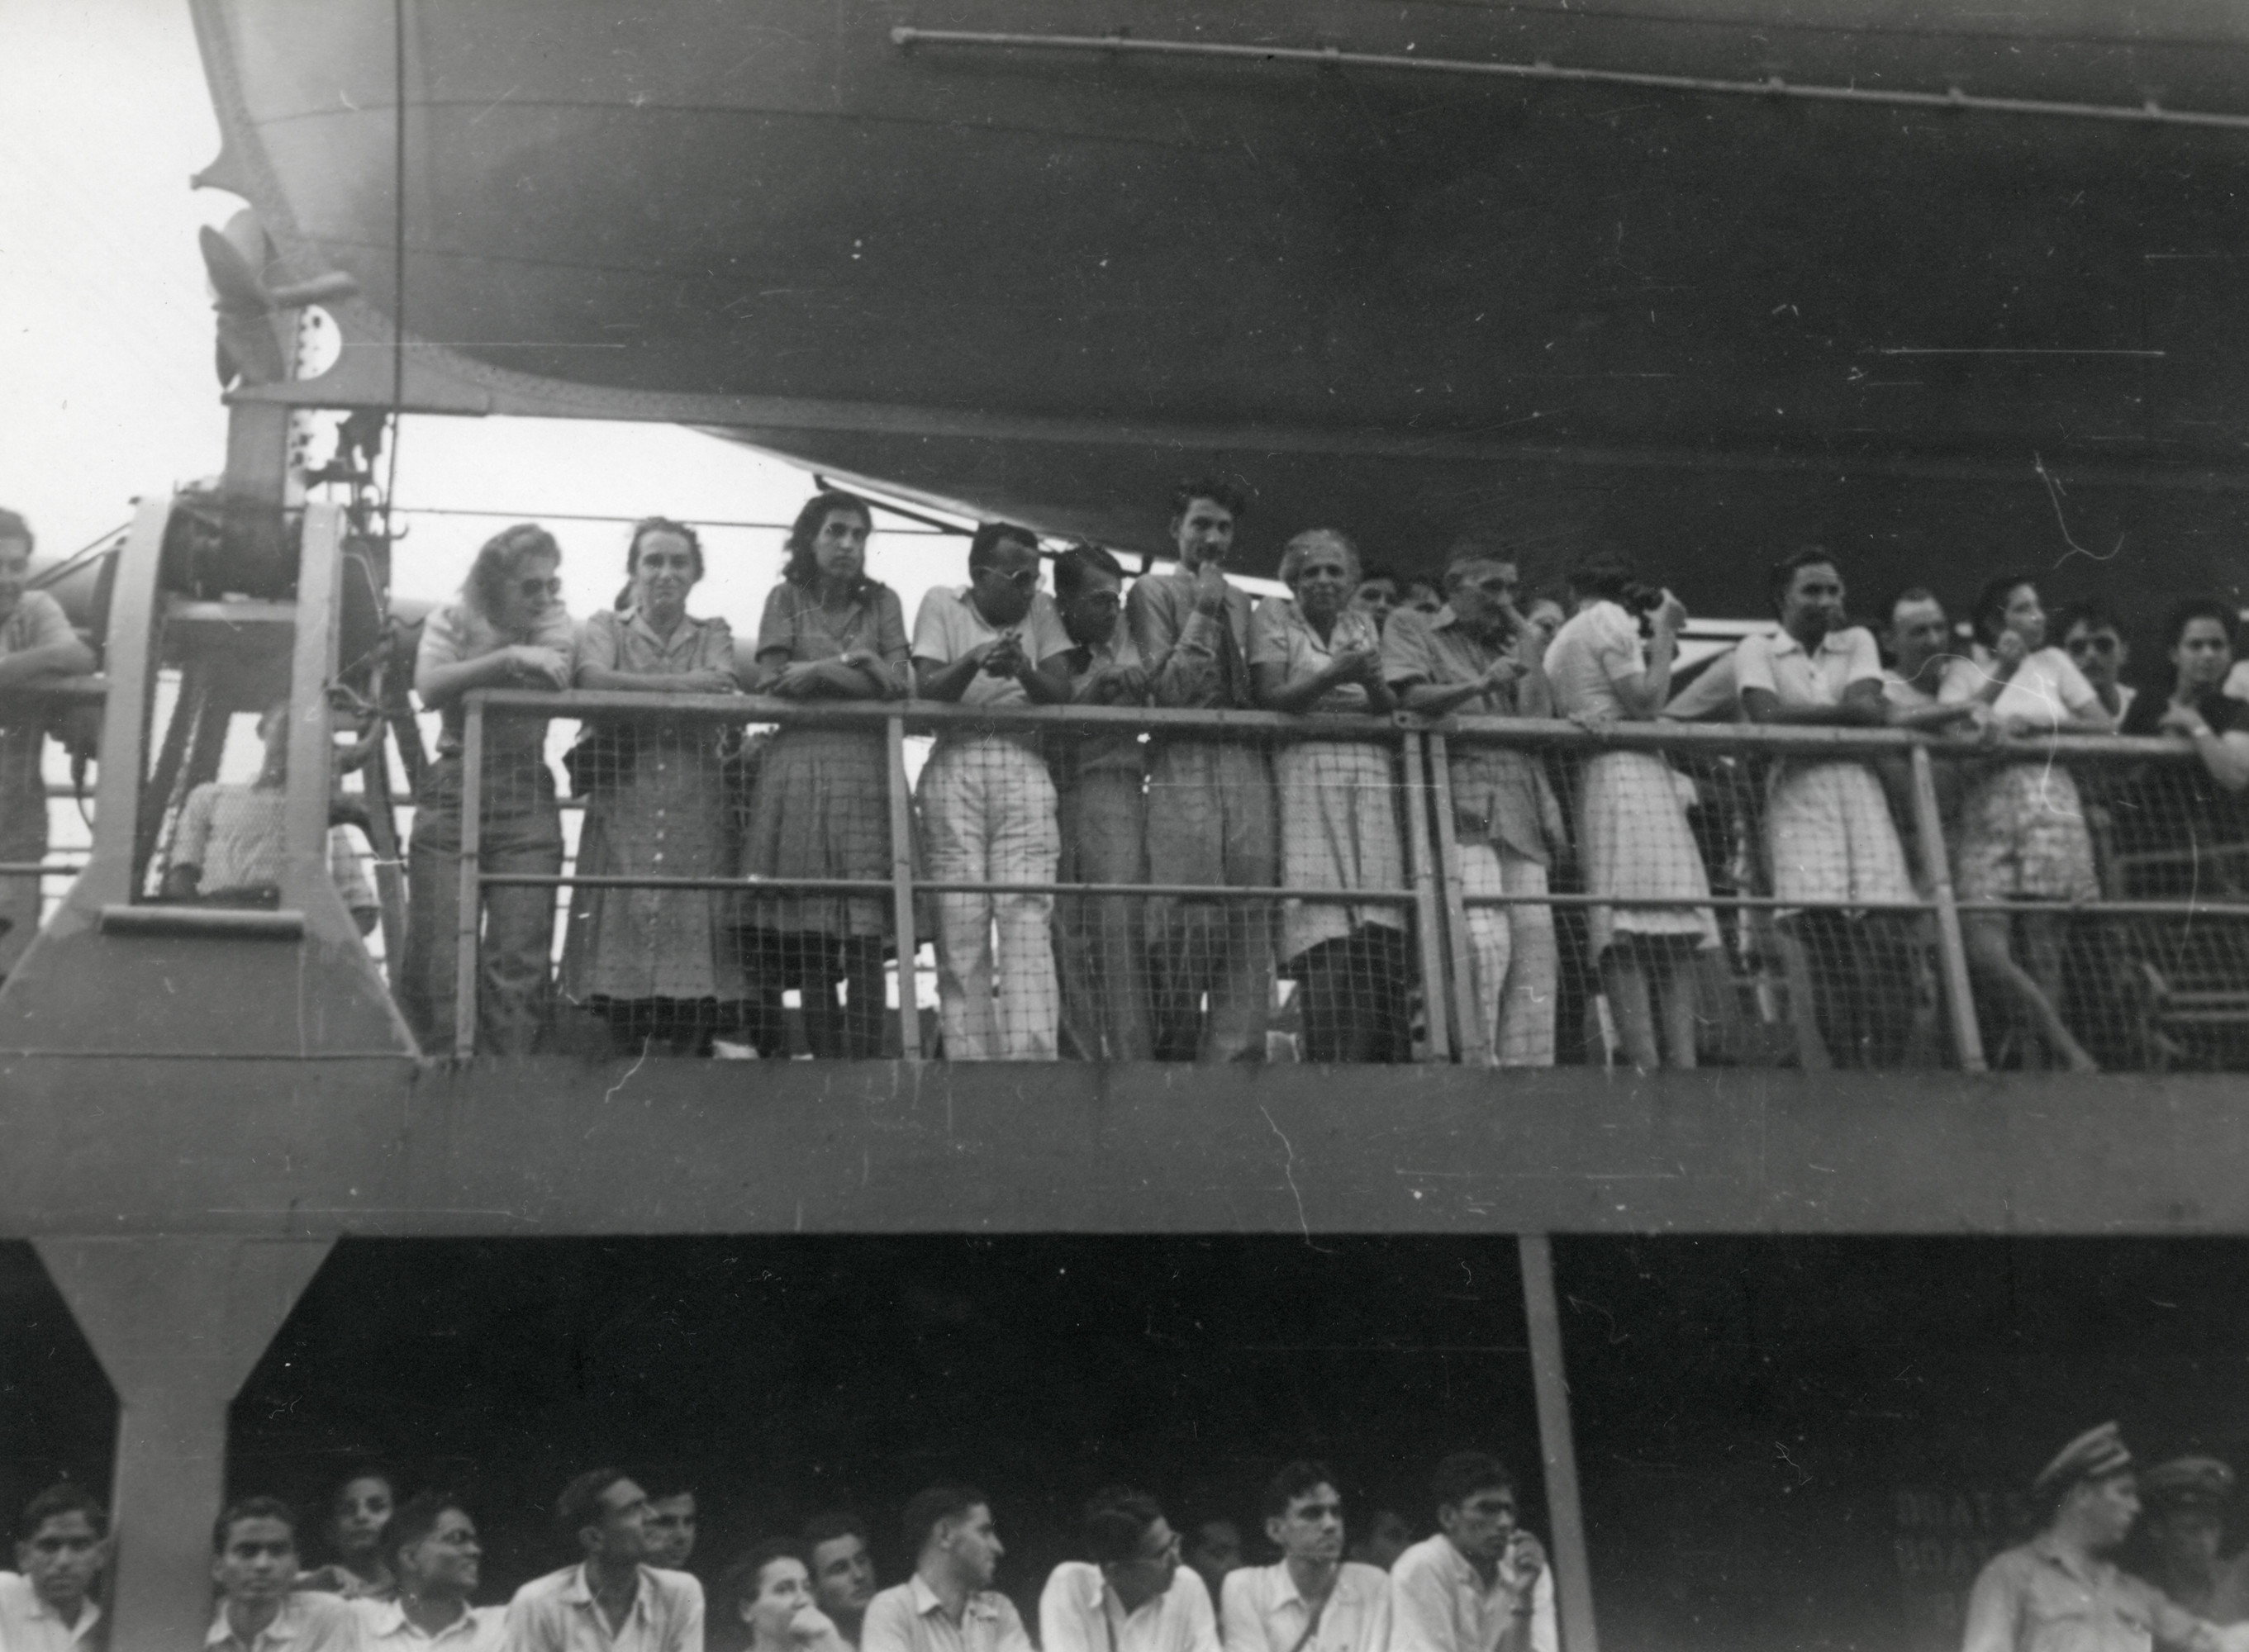 Passengers on board a ship travelling from India to Seattle, Washington.

Among those pictured is Berta Herlinger (second from the left).  She would continue on her trip to live for a time in Spokane.